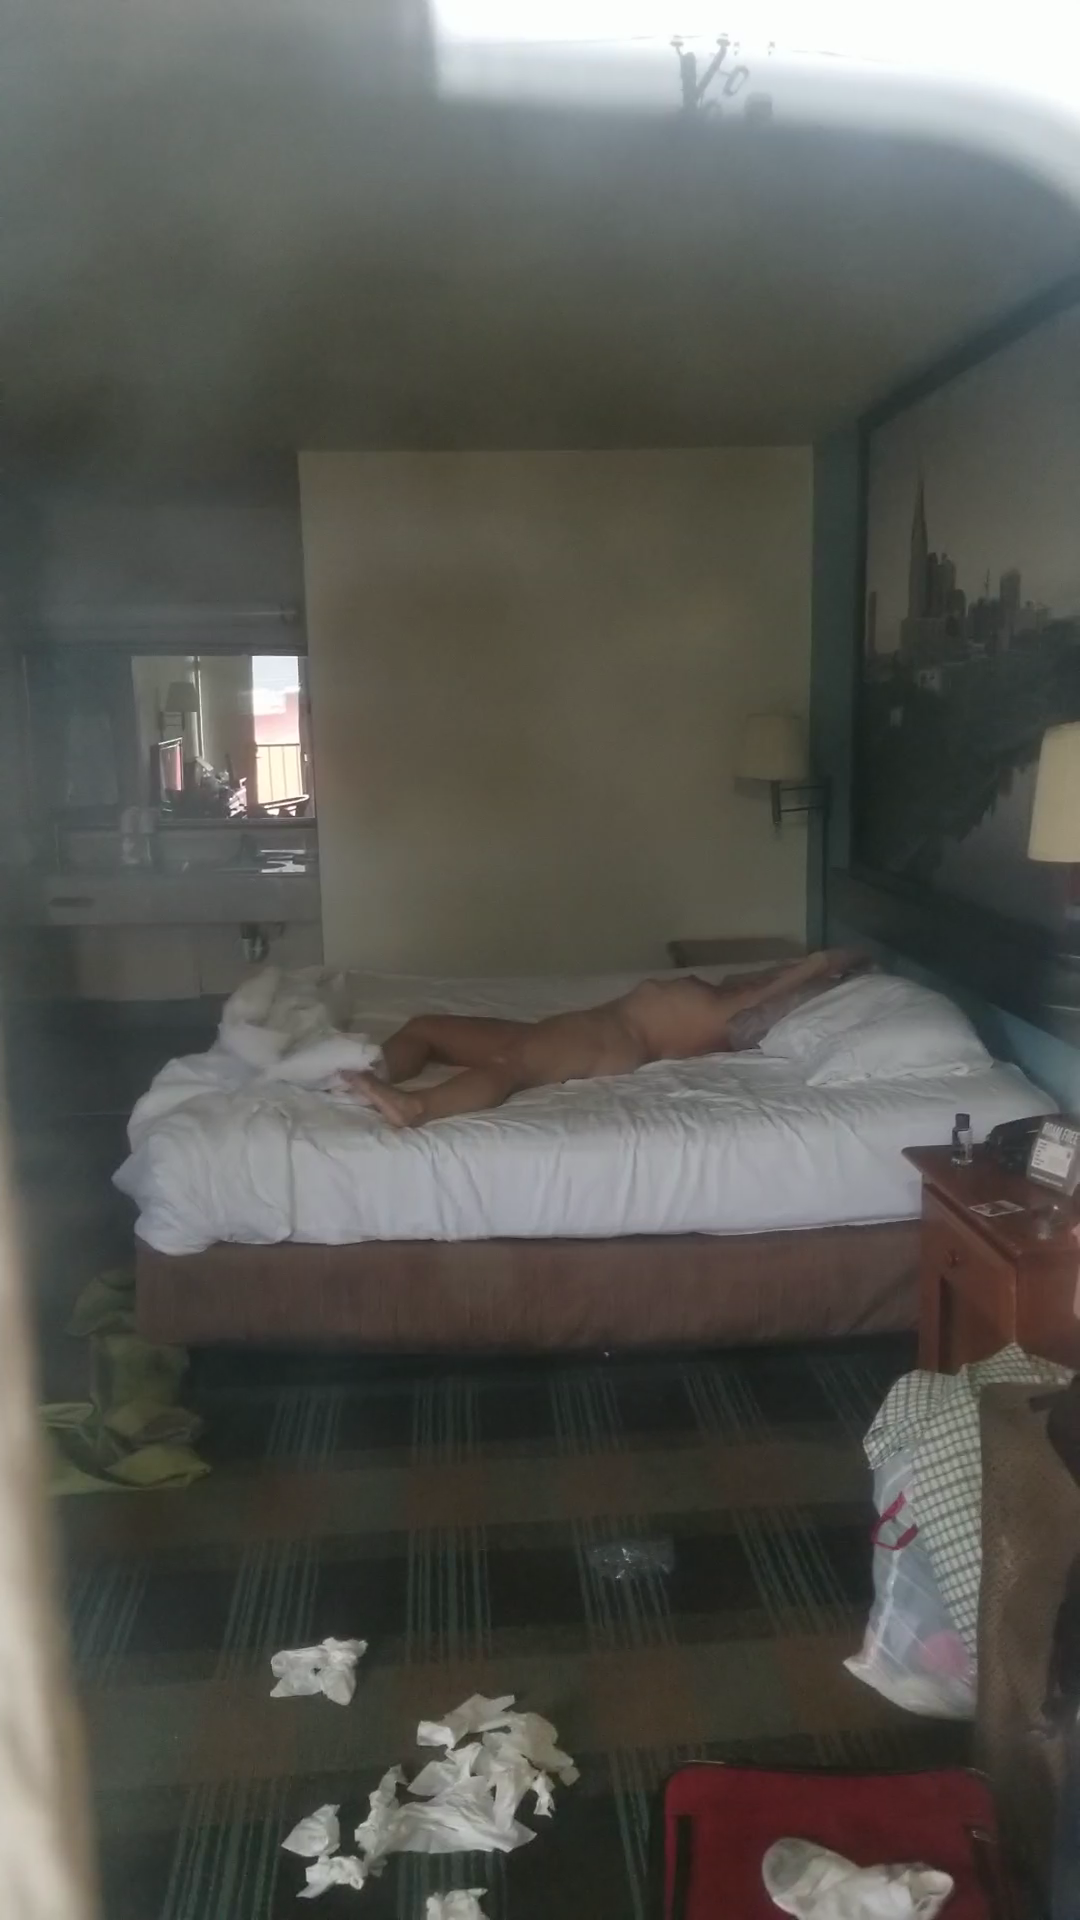 Video by undefined with the username @undefined,  August 22, 2019 at 3:04 AM. The post is about the topic Ladies in bed and the text says 'from outside the room. Let me know what you think'